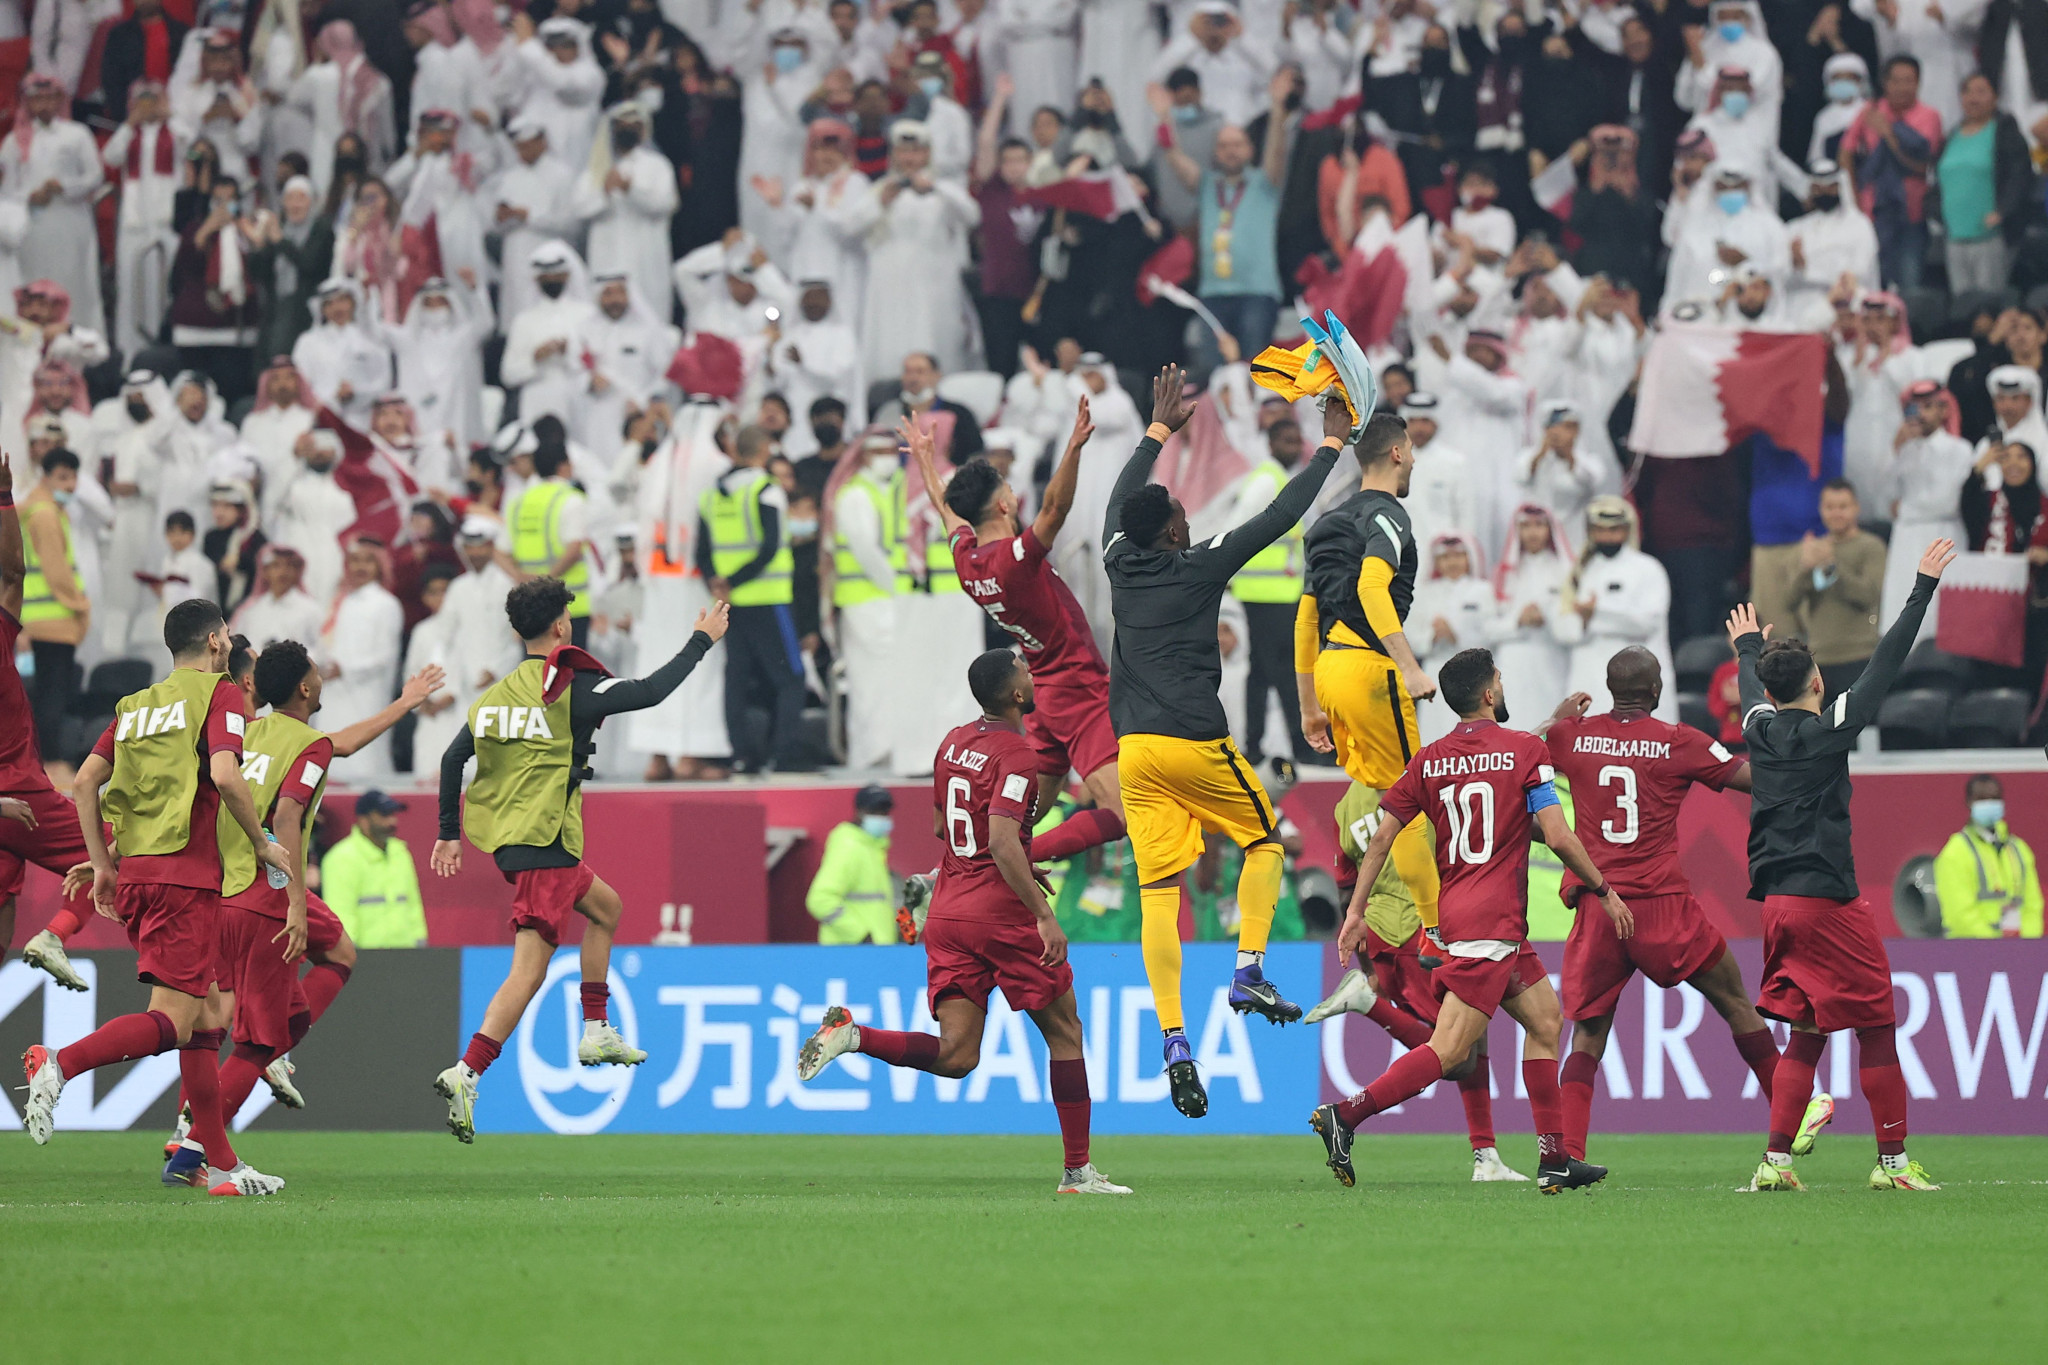 Qatar eased past the UAE to reach the semi-finals ©Getty Images